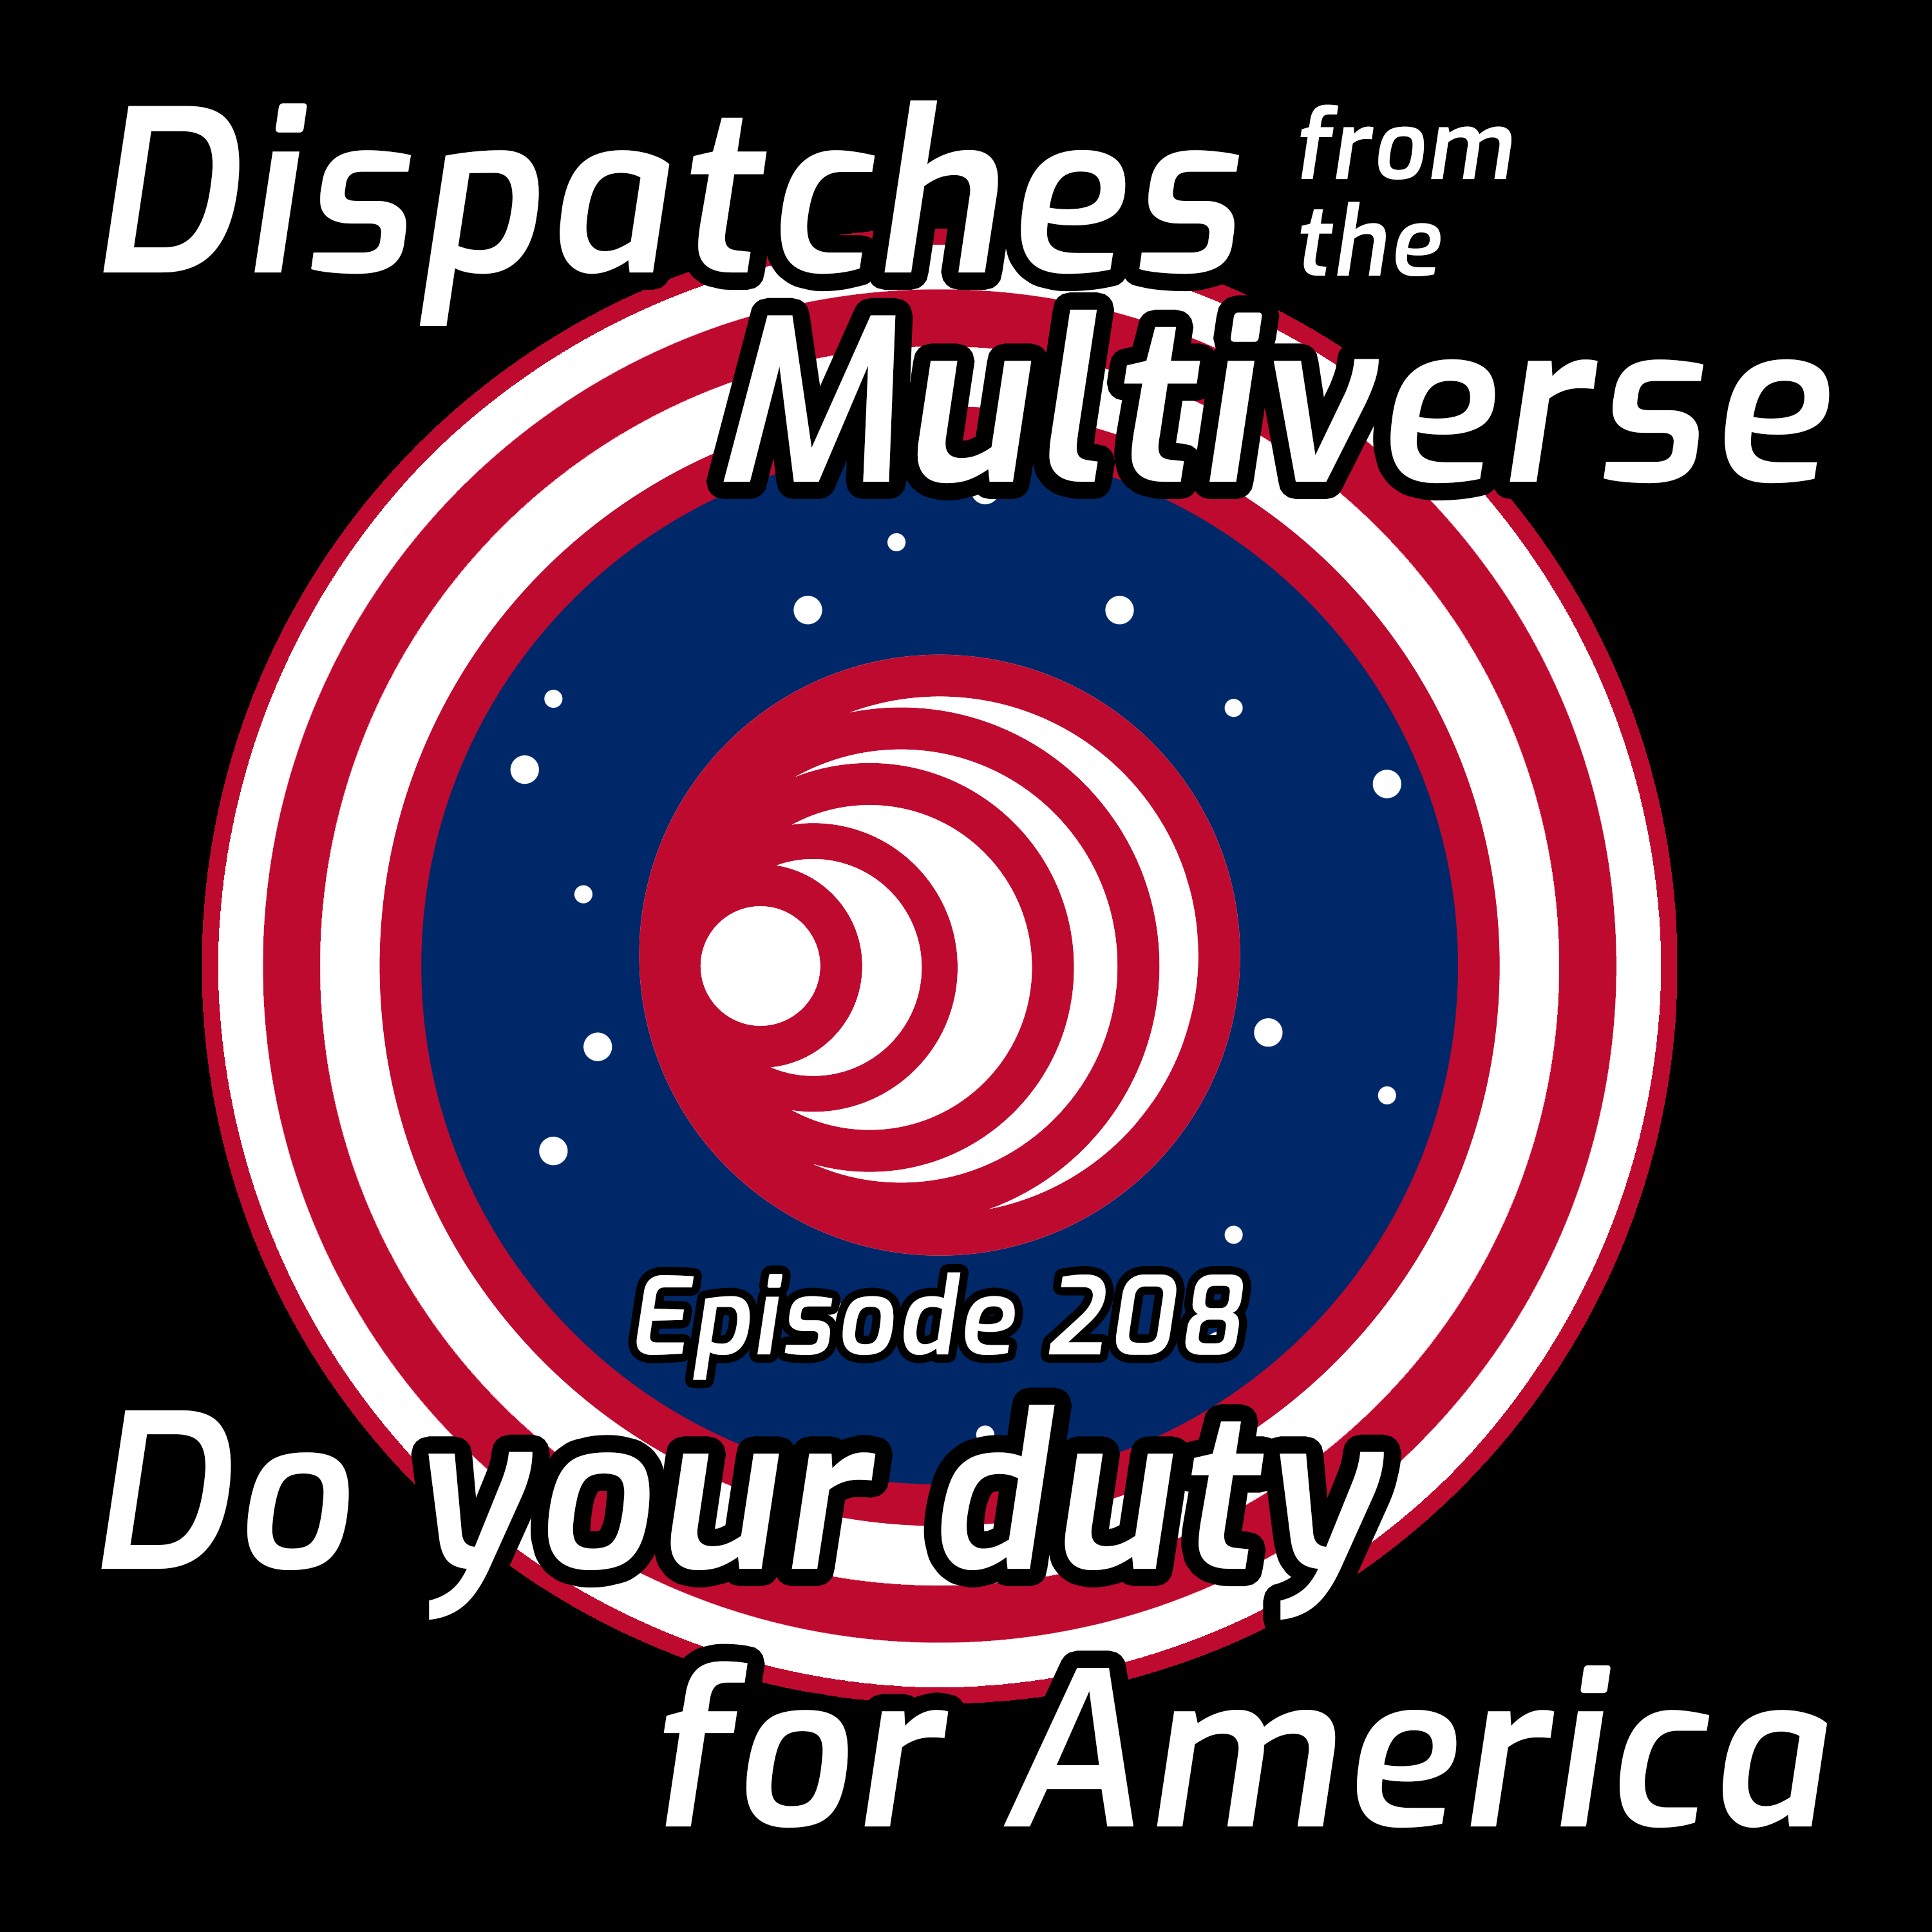 Episode 208: Do your duty for America